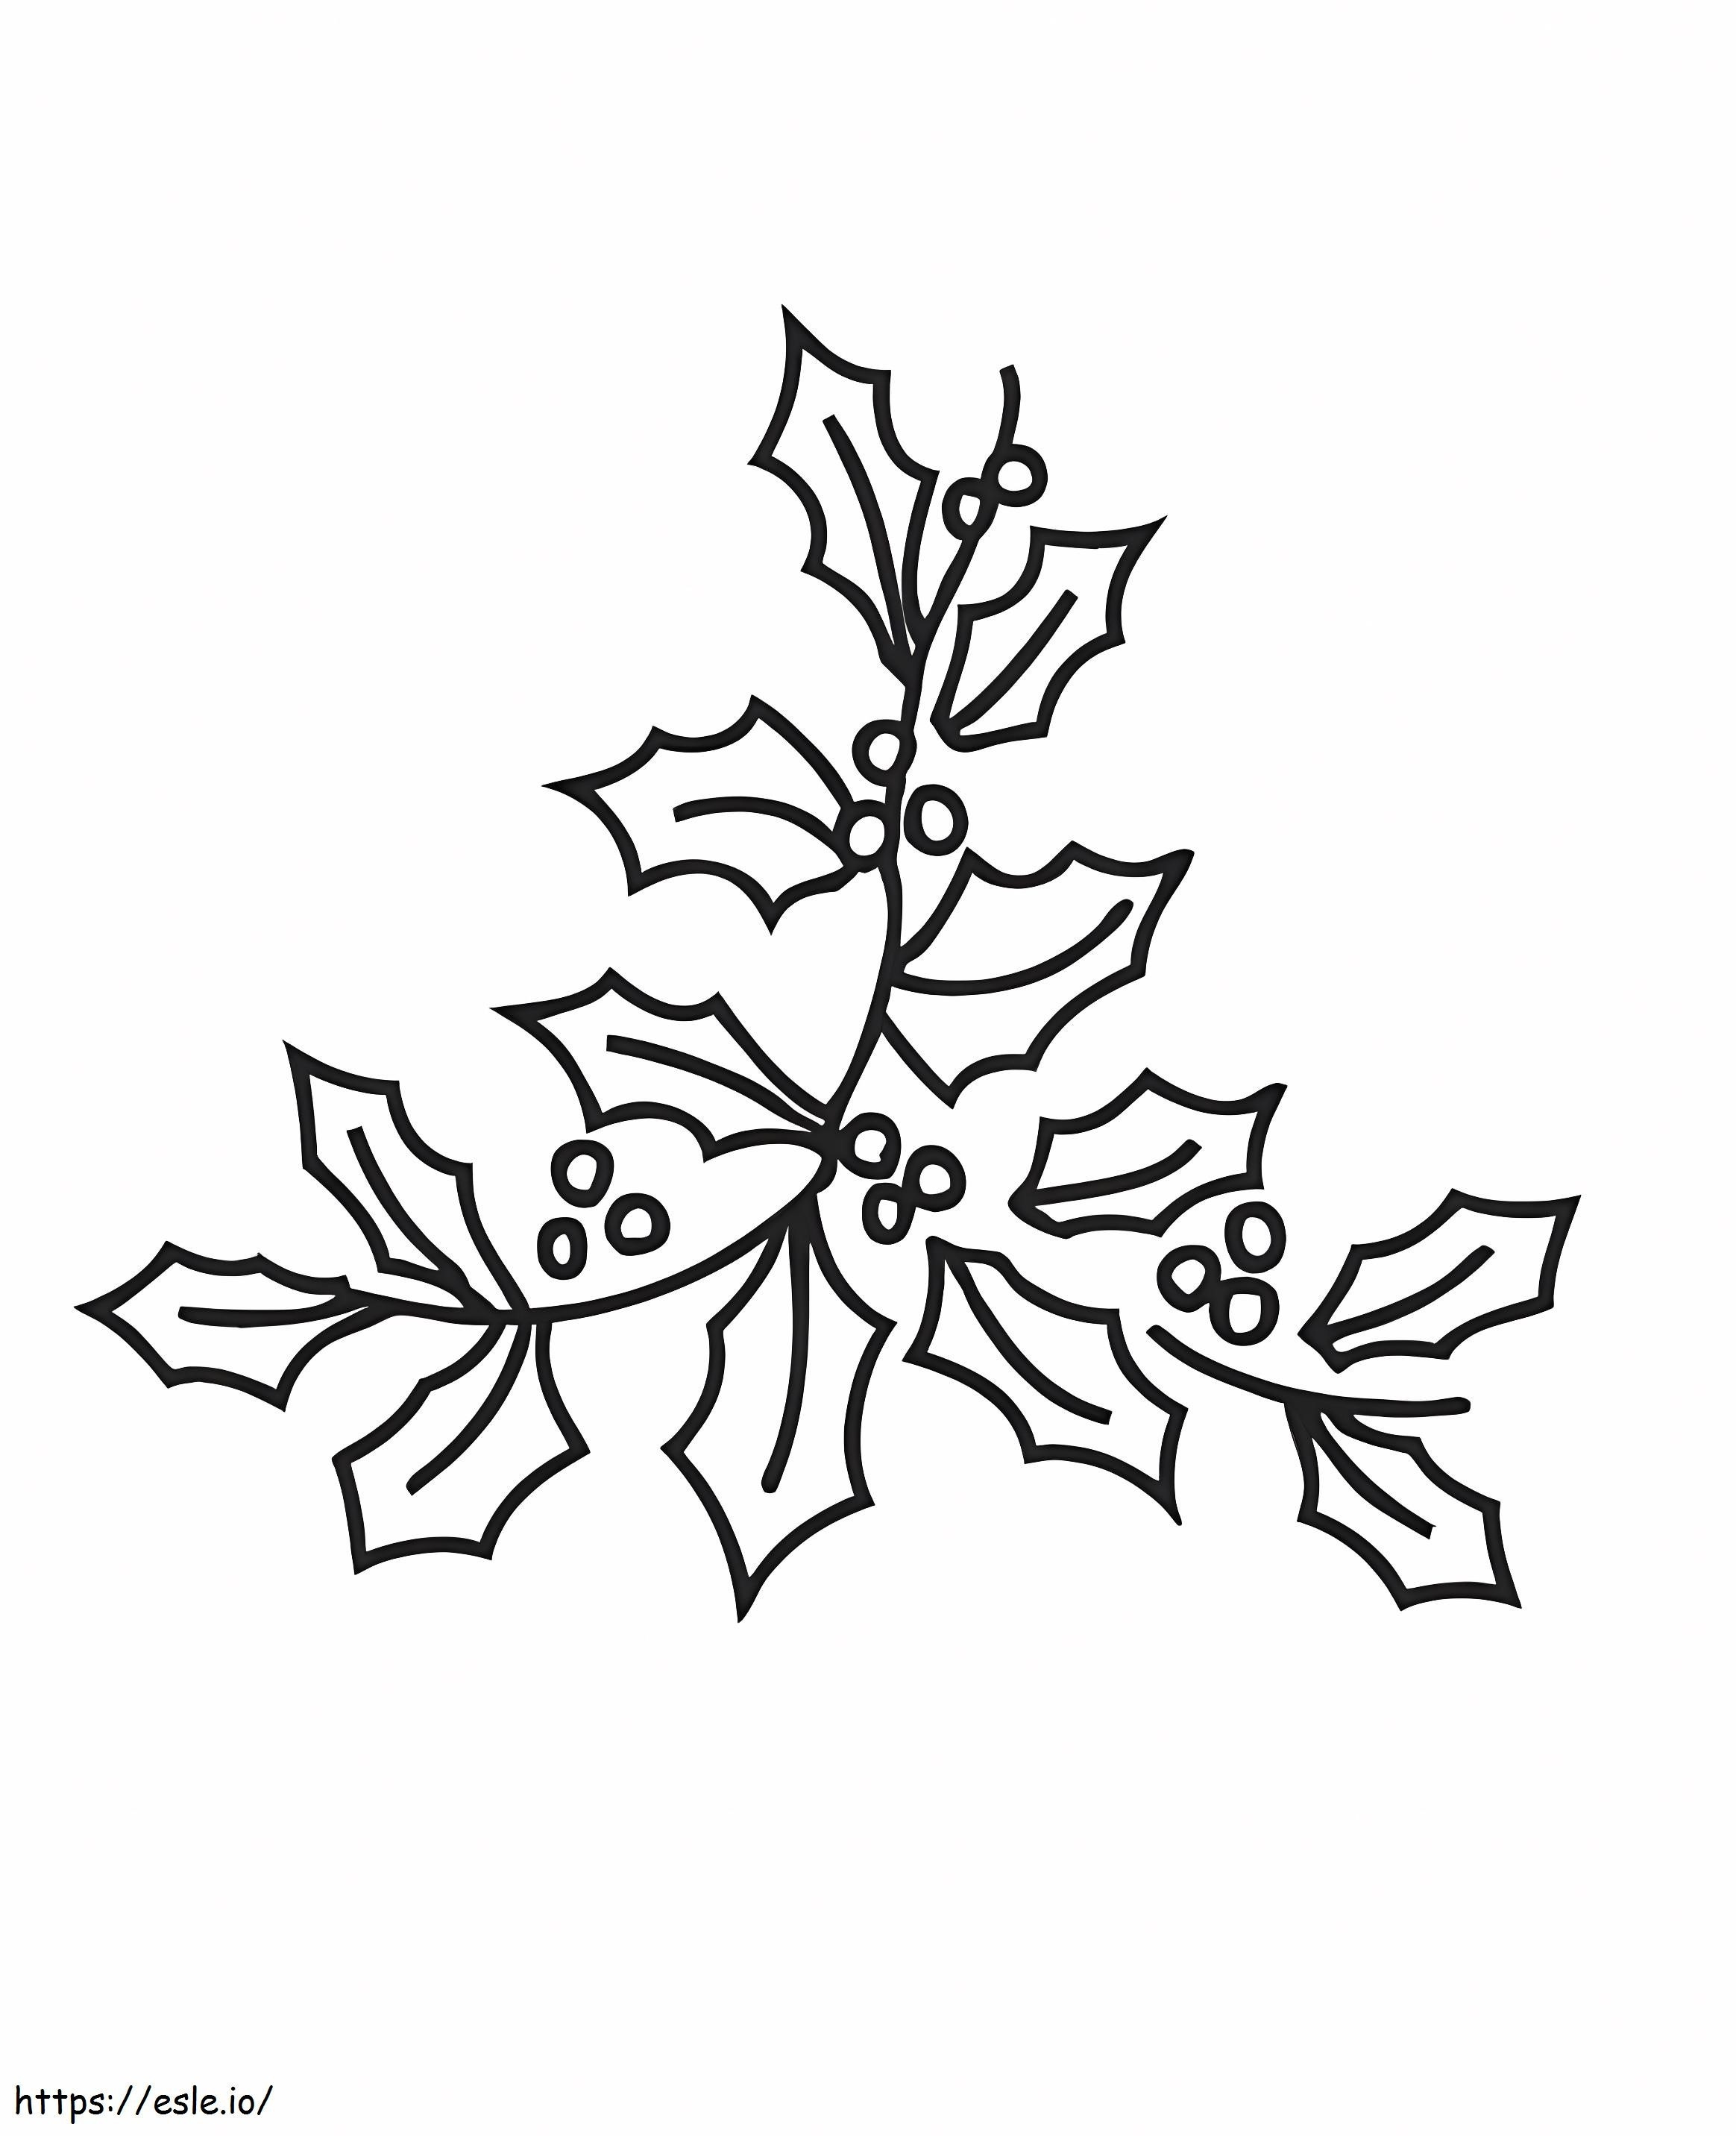 Christmas Holly 15 coloring page